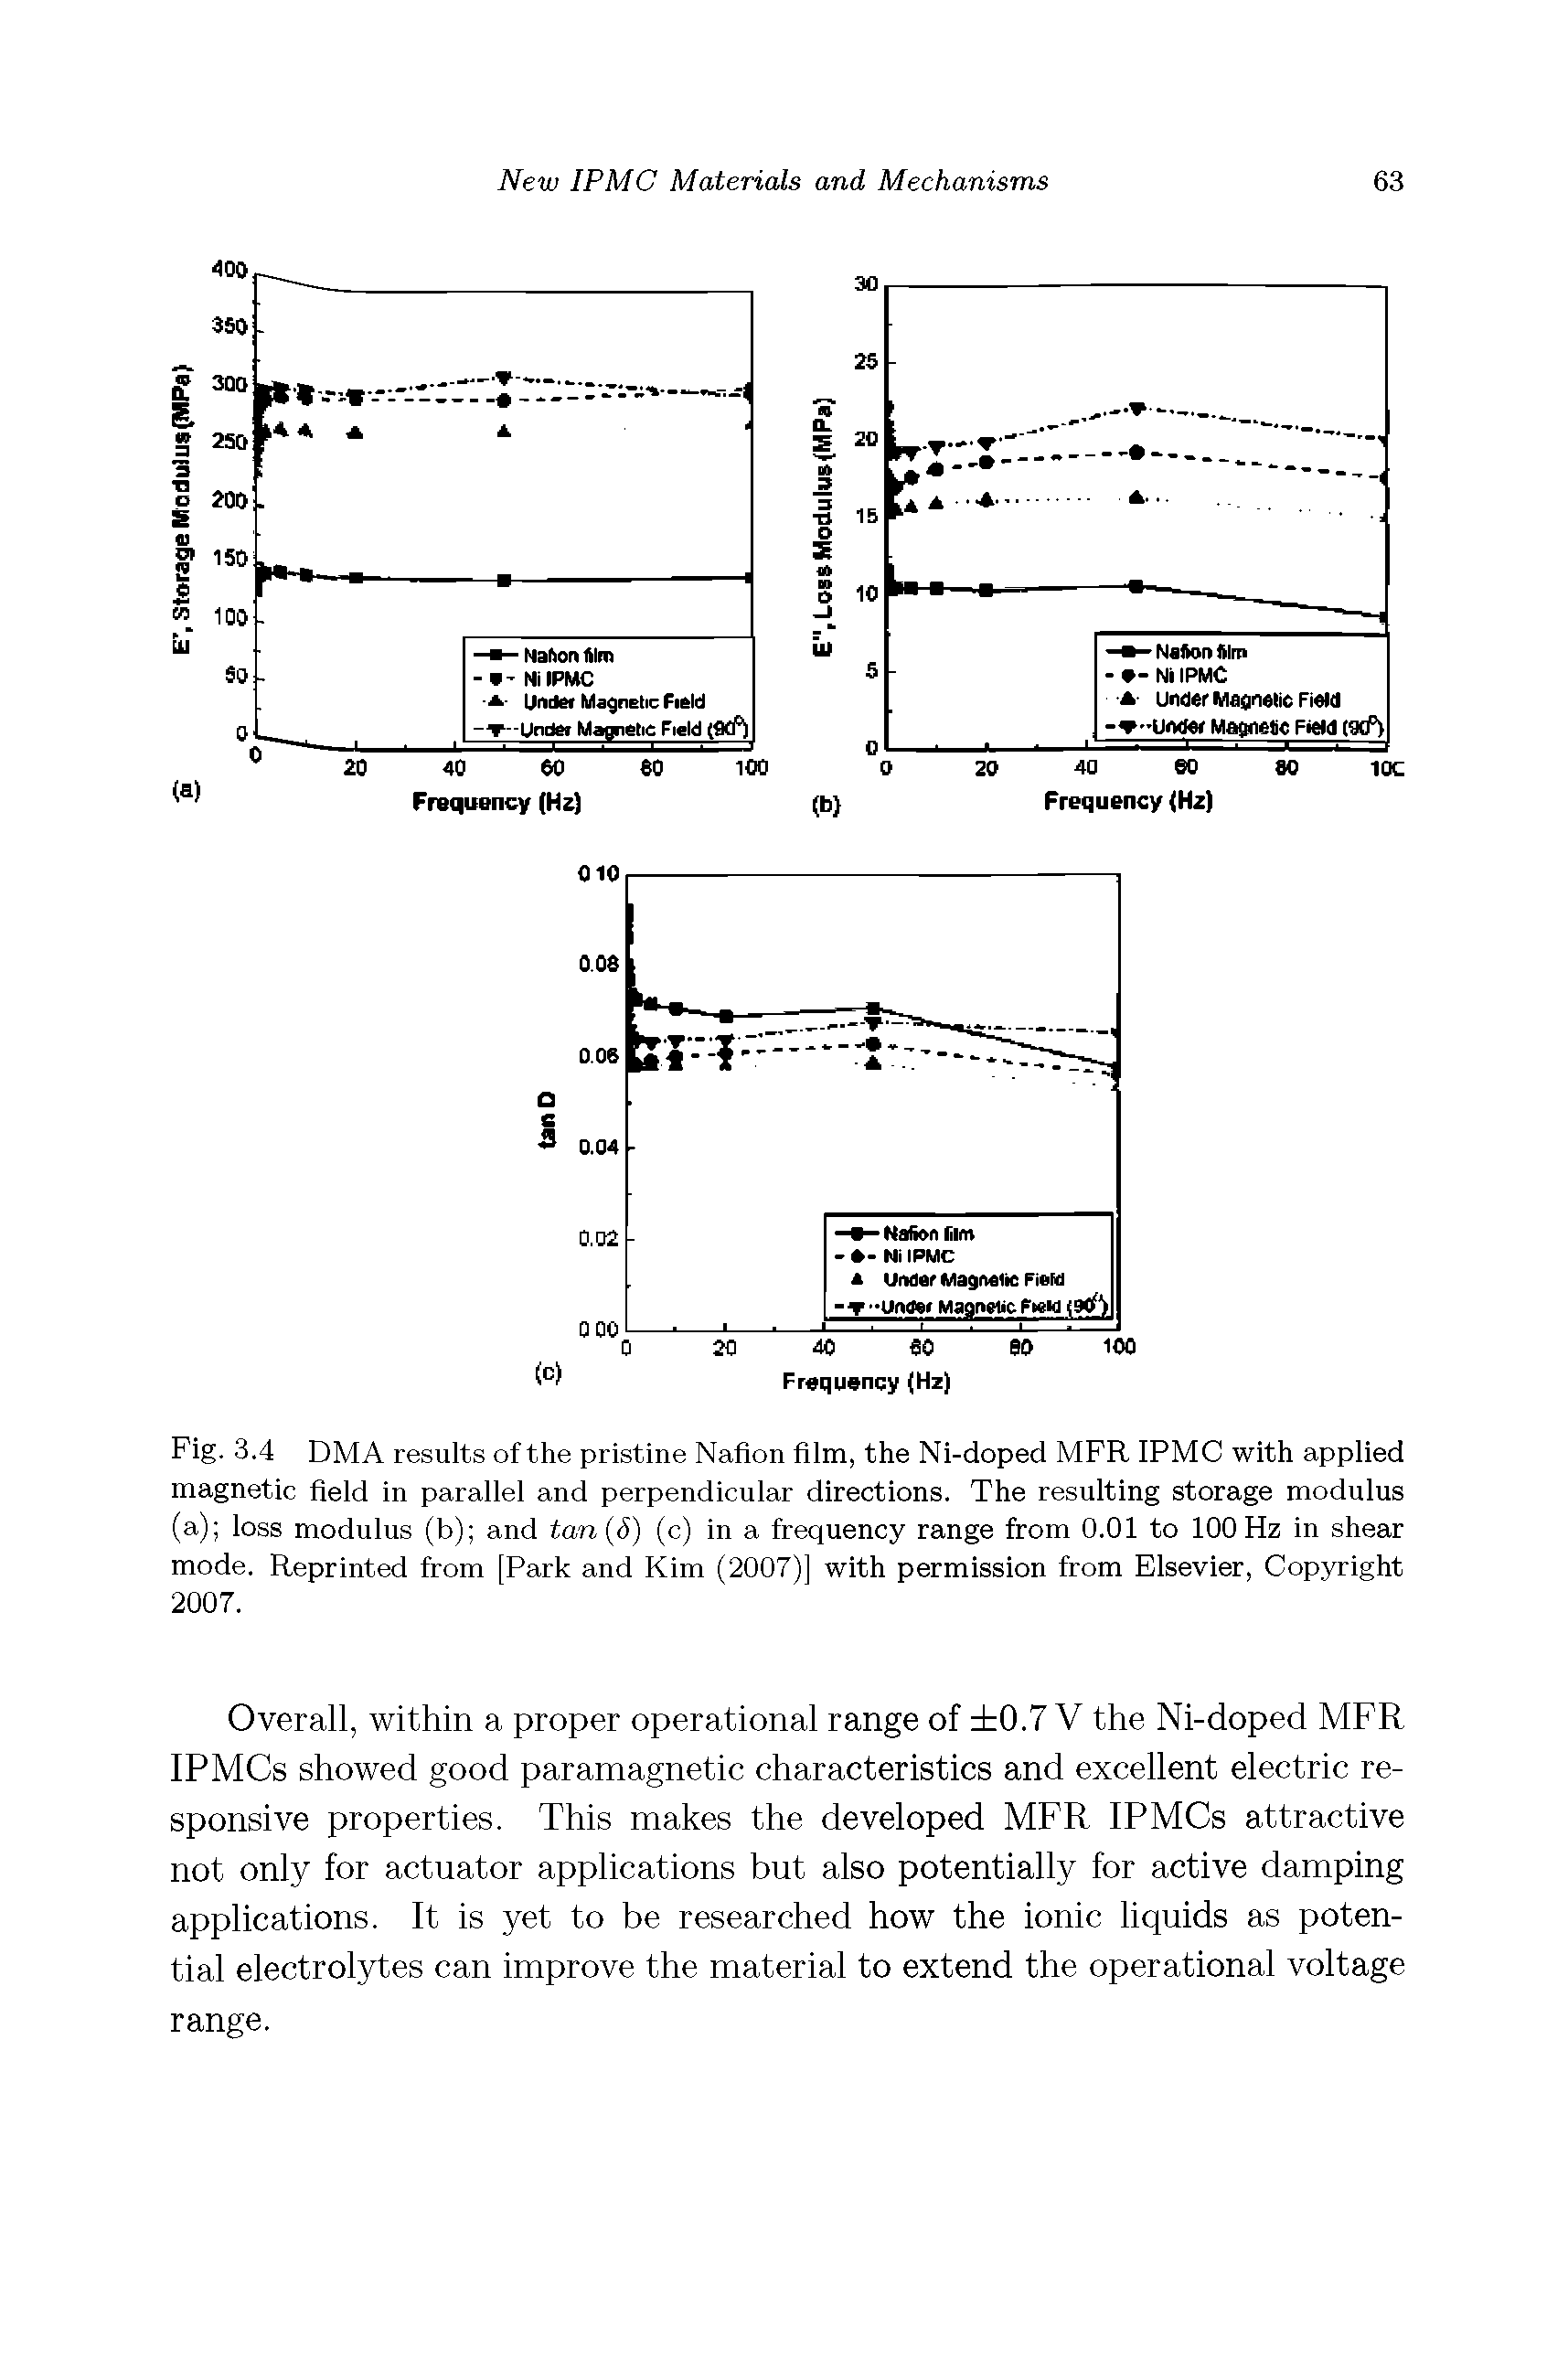 Fig. 3.4 DMA results of the pristine Nation film, the Ni-doped MFR IPMC with applied magnetic field in parallel and perpendicular directions. The resulting storage modulus (a) loss modulus (b) and tan 5) (c) in a frequency range from 0.01 to 100 Hz in shear mode. Reprinted from [Park and Kim (2007)] with permission from Elsevier, Copyright 2007.